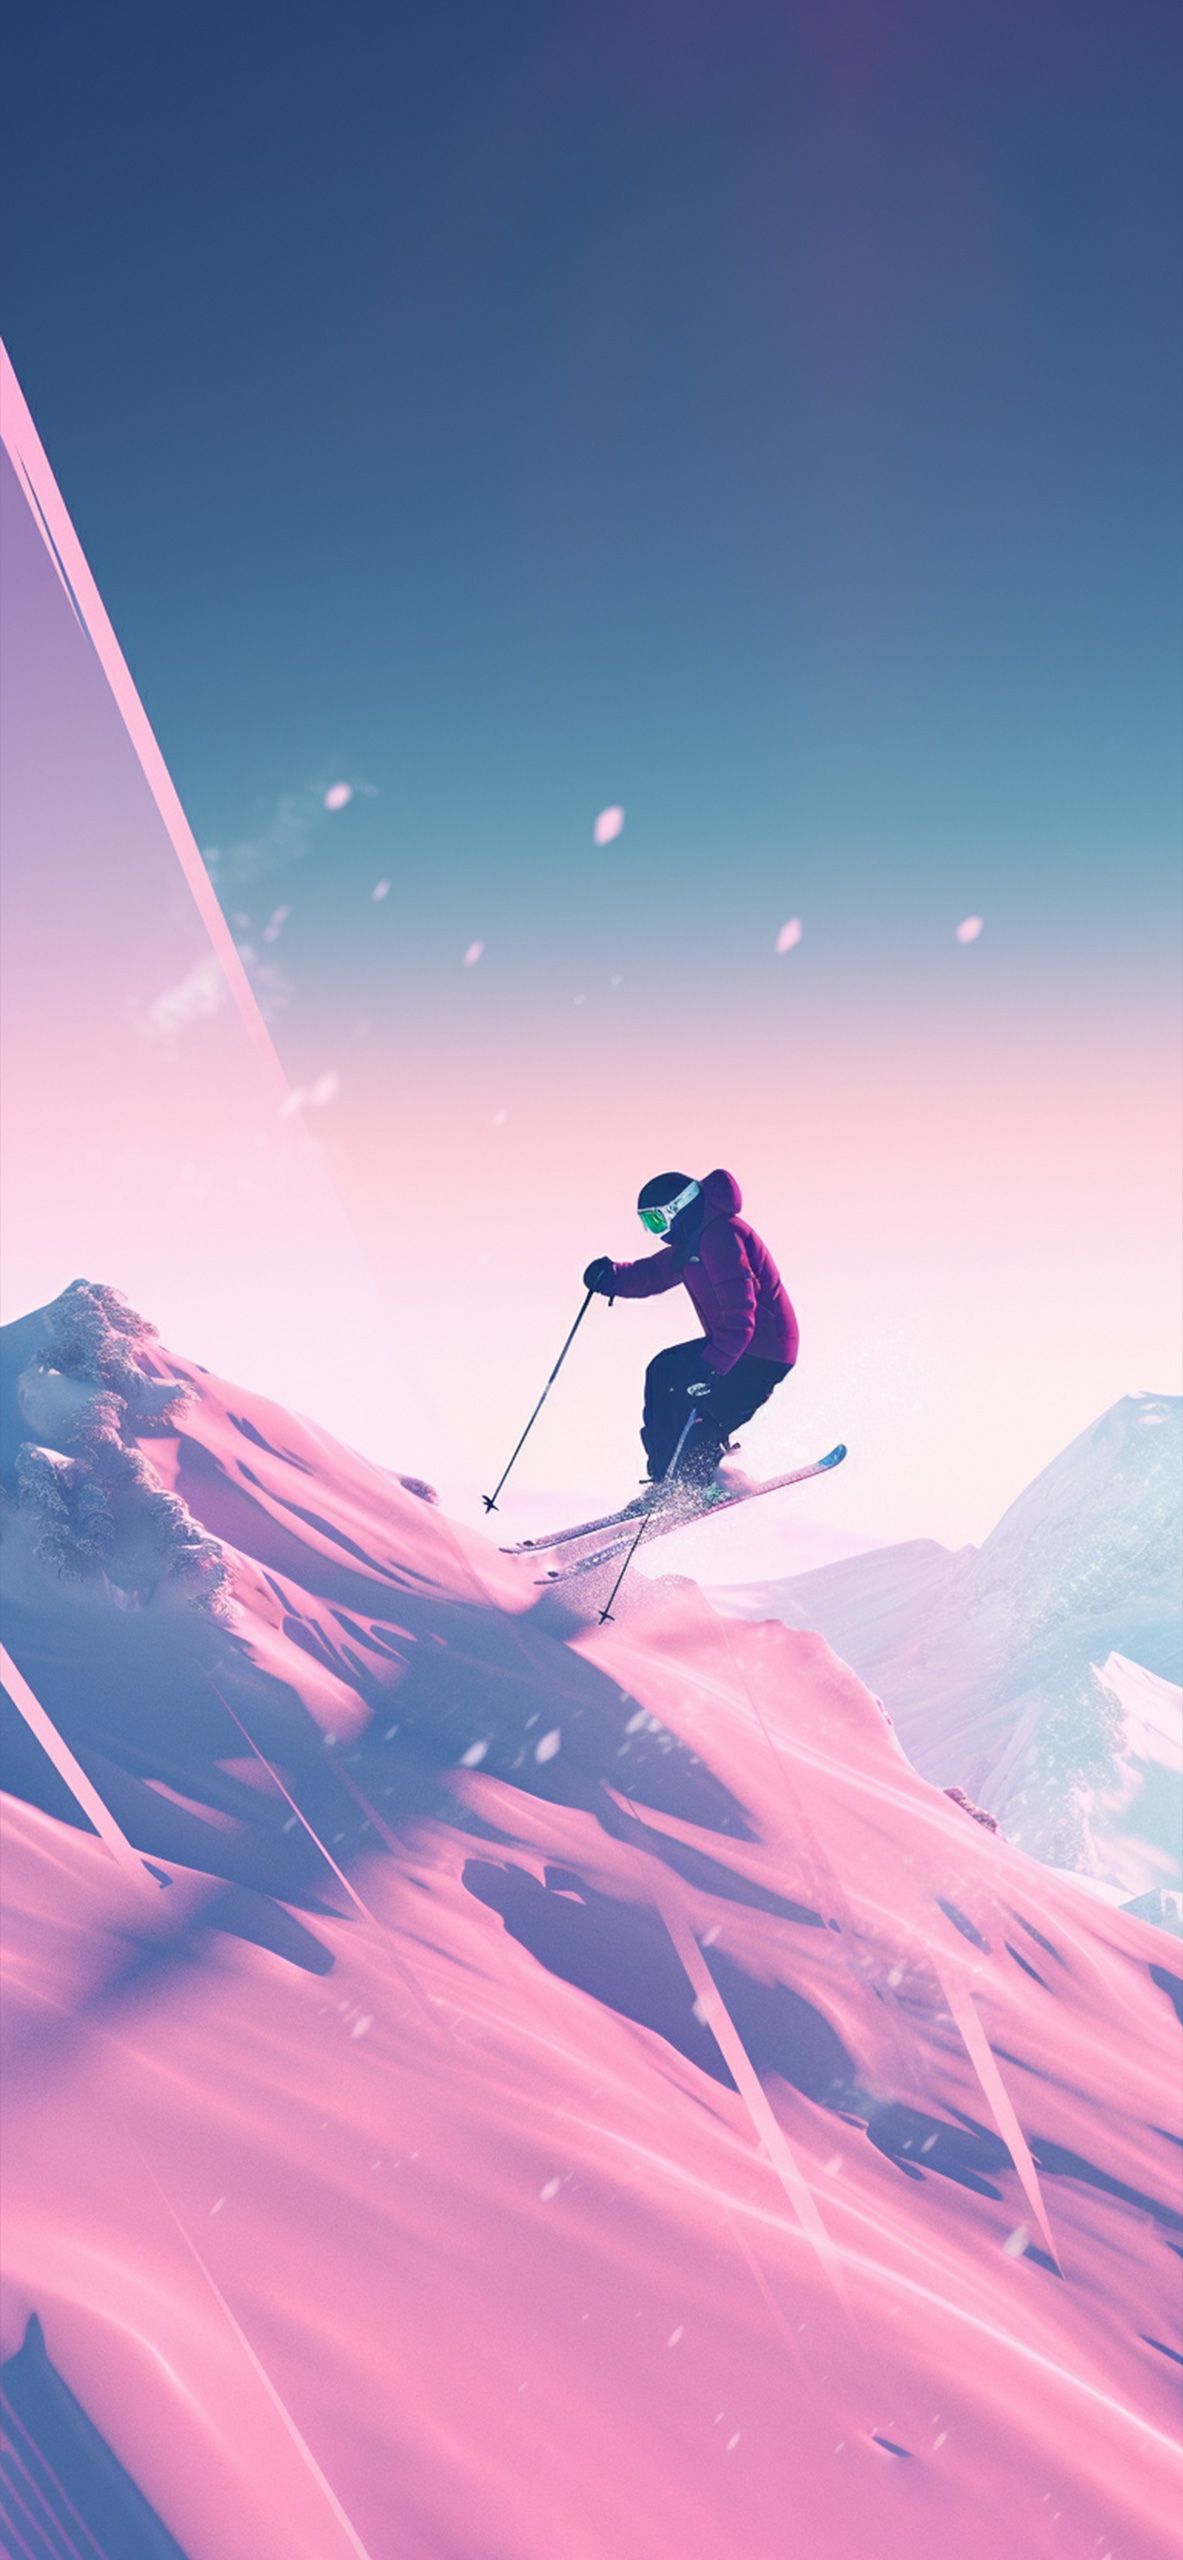 A skier flying down a mountain with pink light rays - Ski